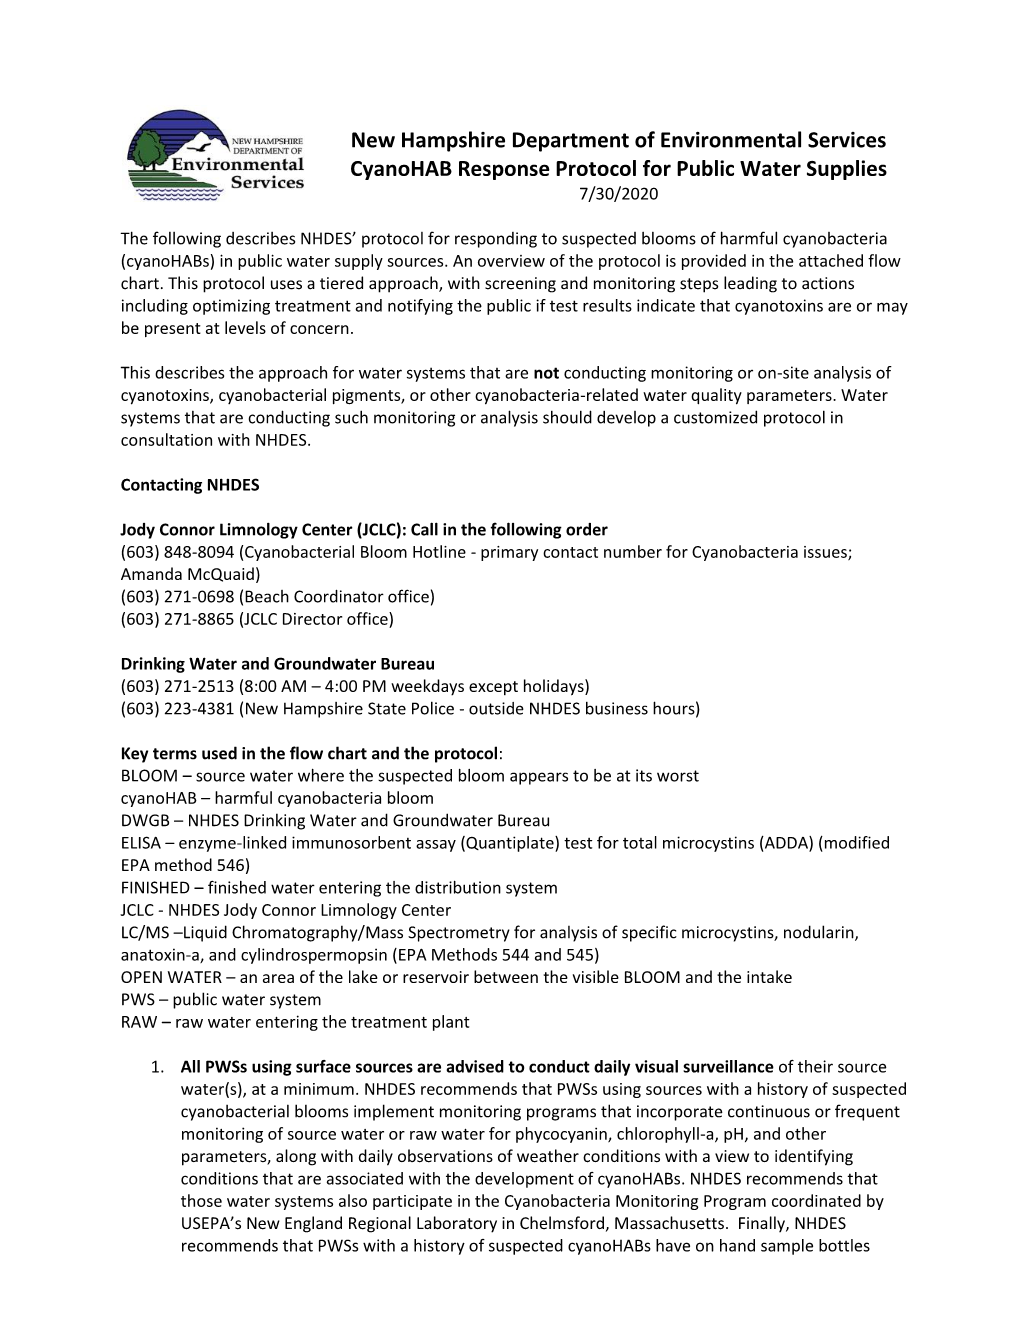 NHDES Cyanohab Response Protocol for Public Water Supplies